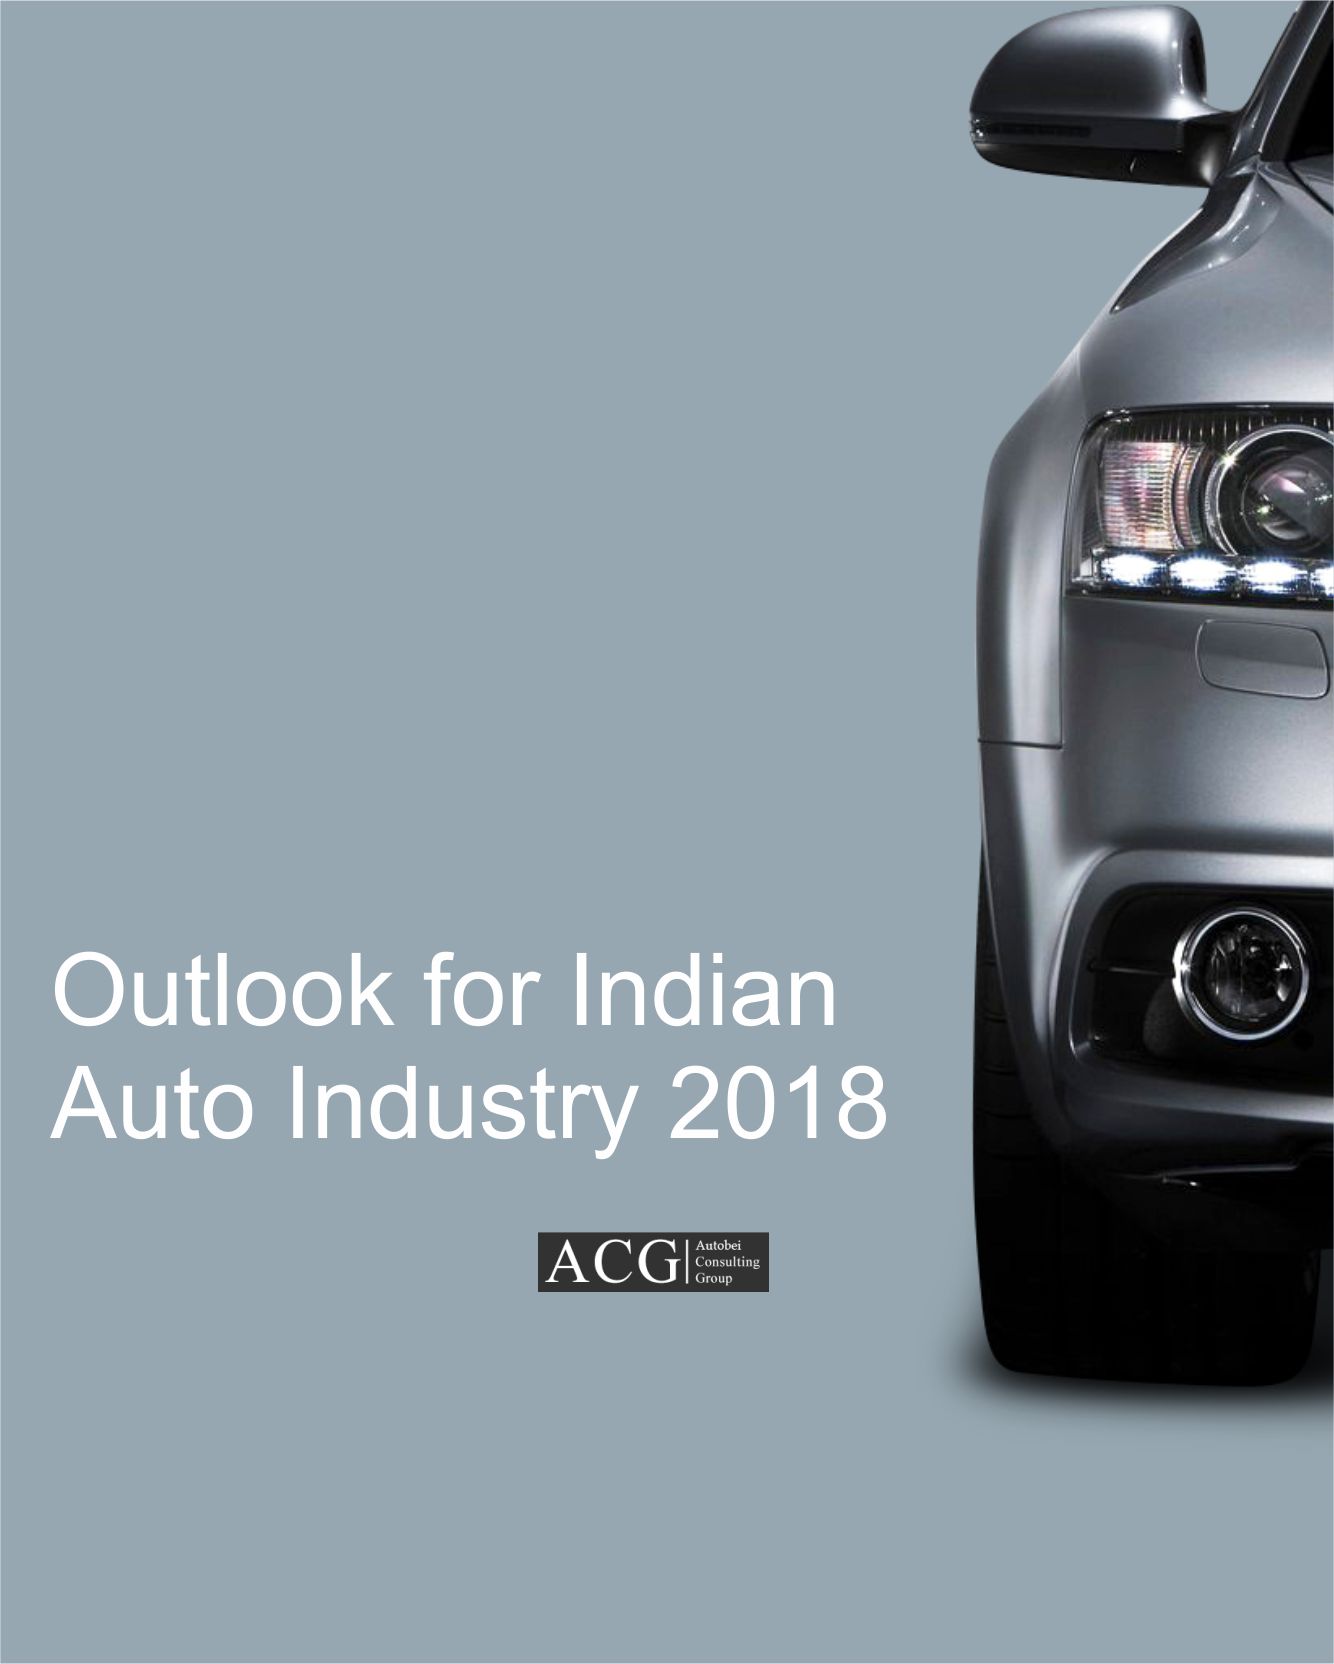 Outlook for Indian Auto Industry 2018